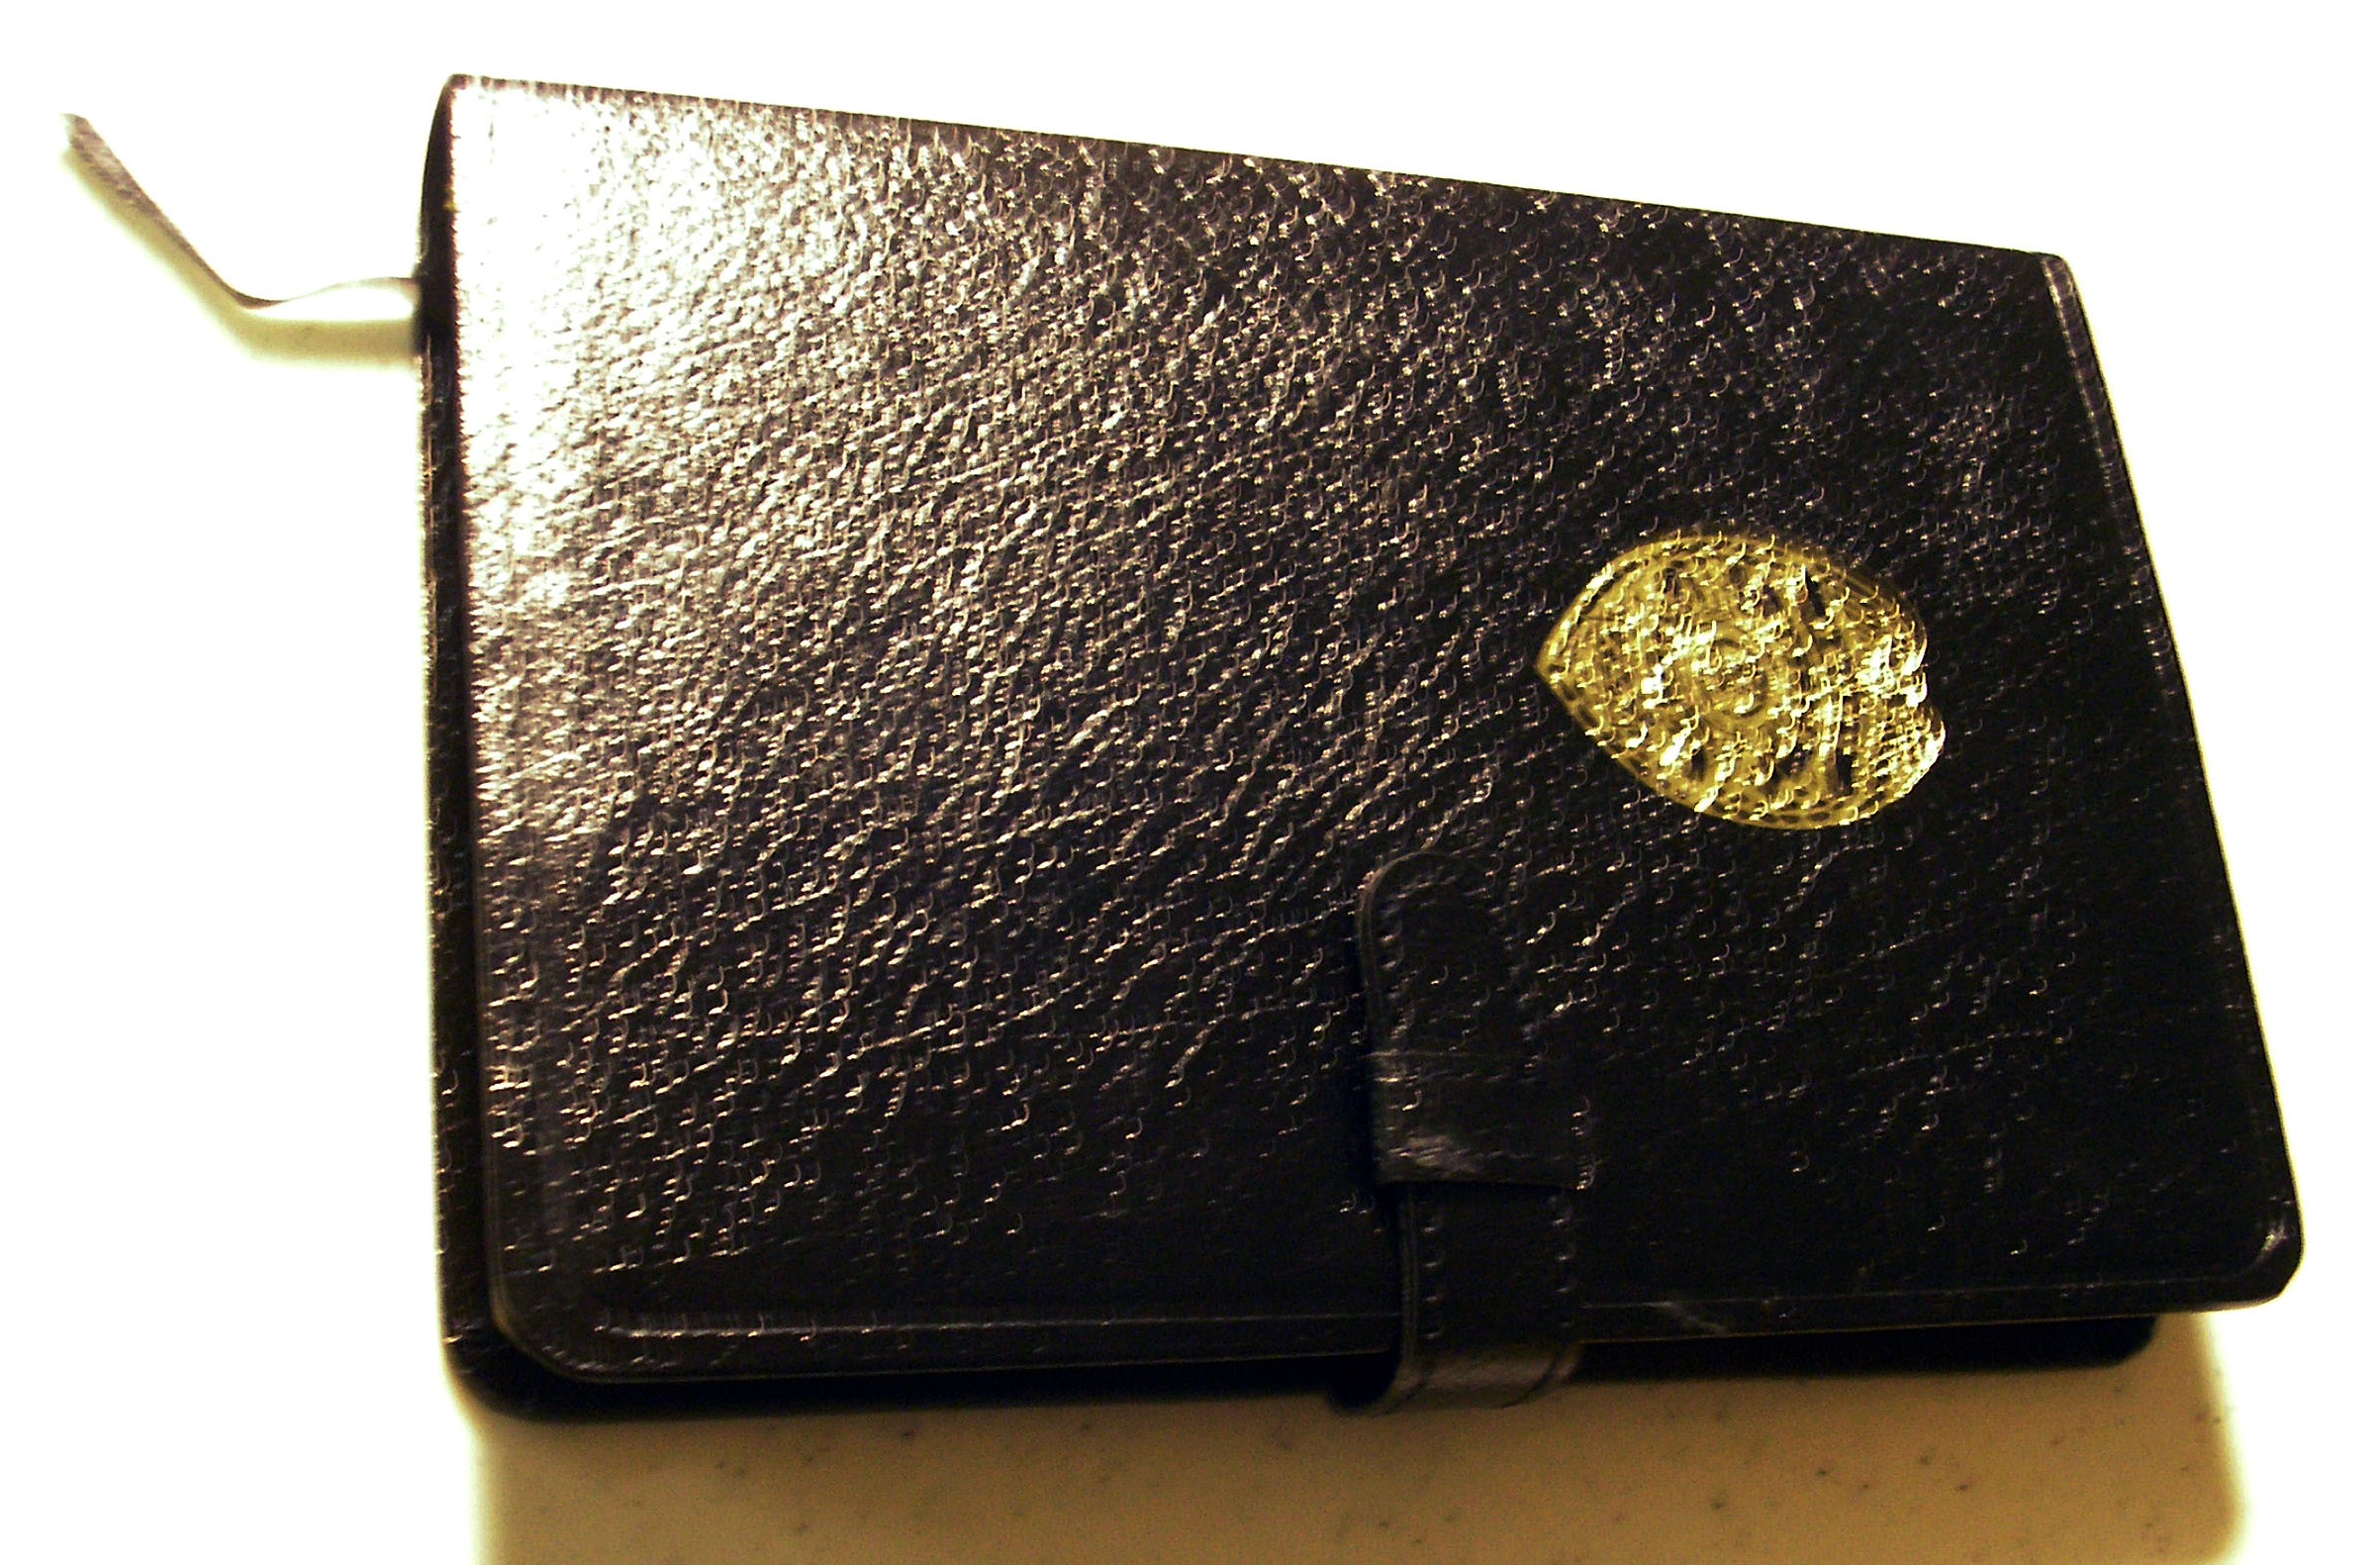 A black leather police officer’s bible is displayed on a white surface. It includes a gold police shield on its cover.